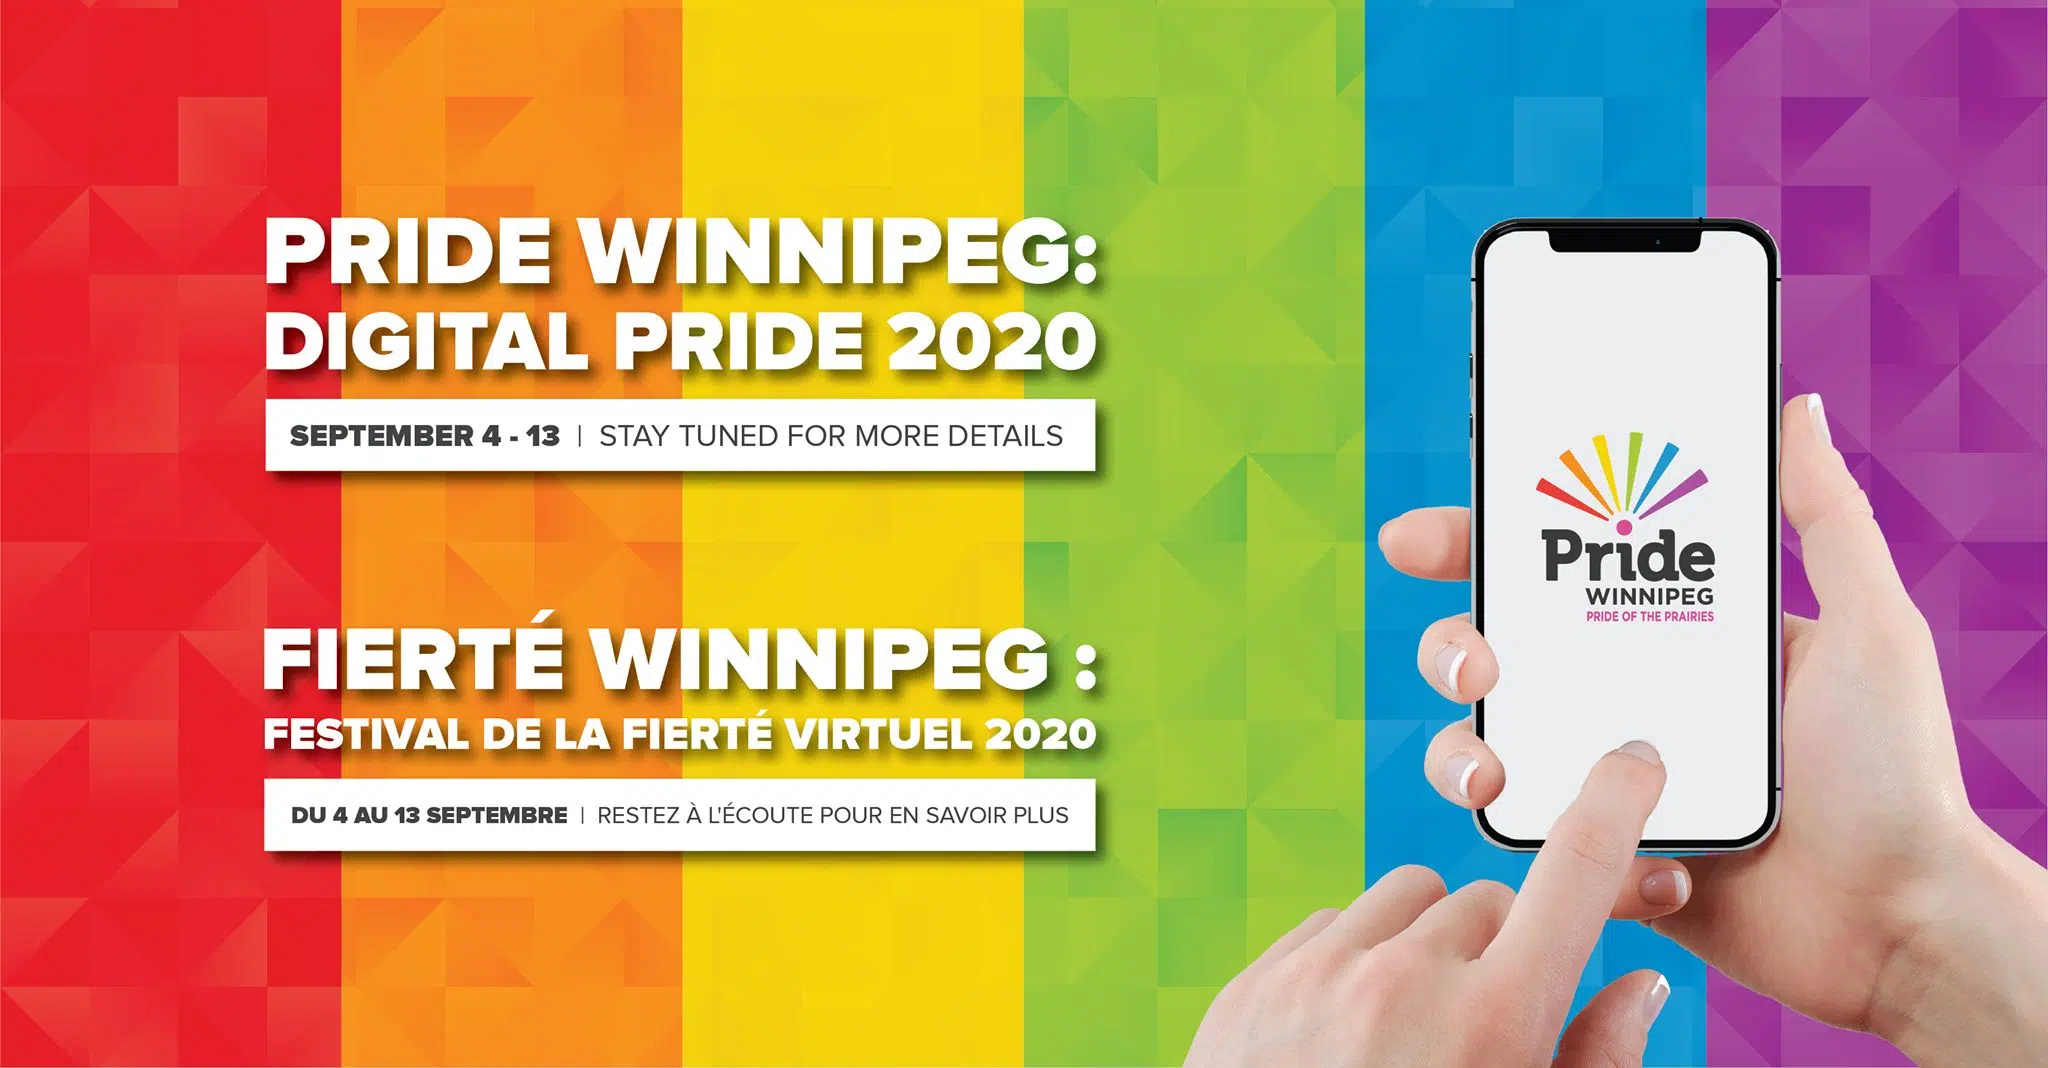 Pride Winnipeg Releases More Details About Virtual Pride